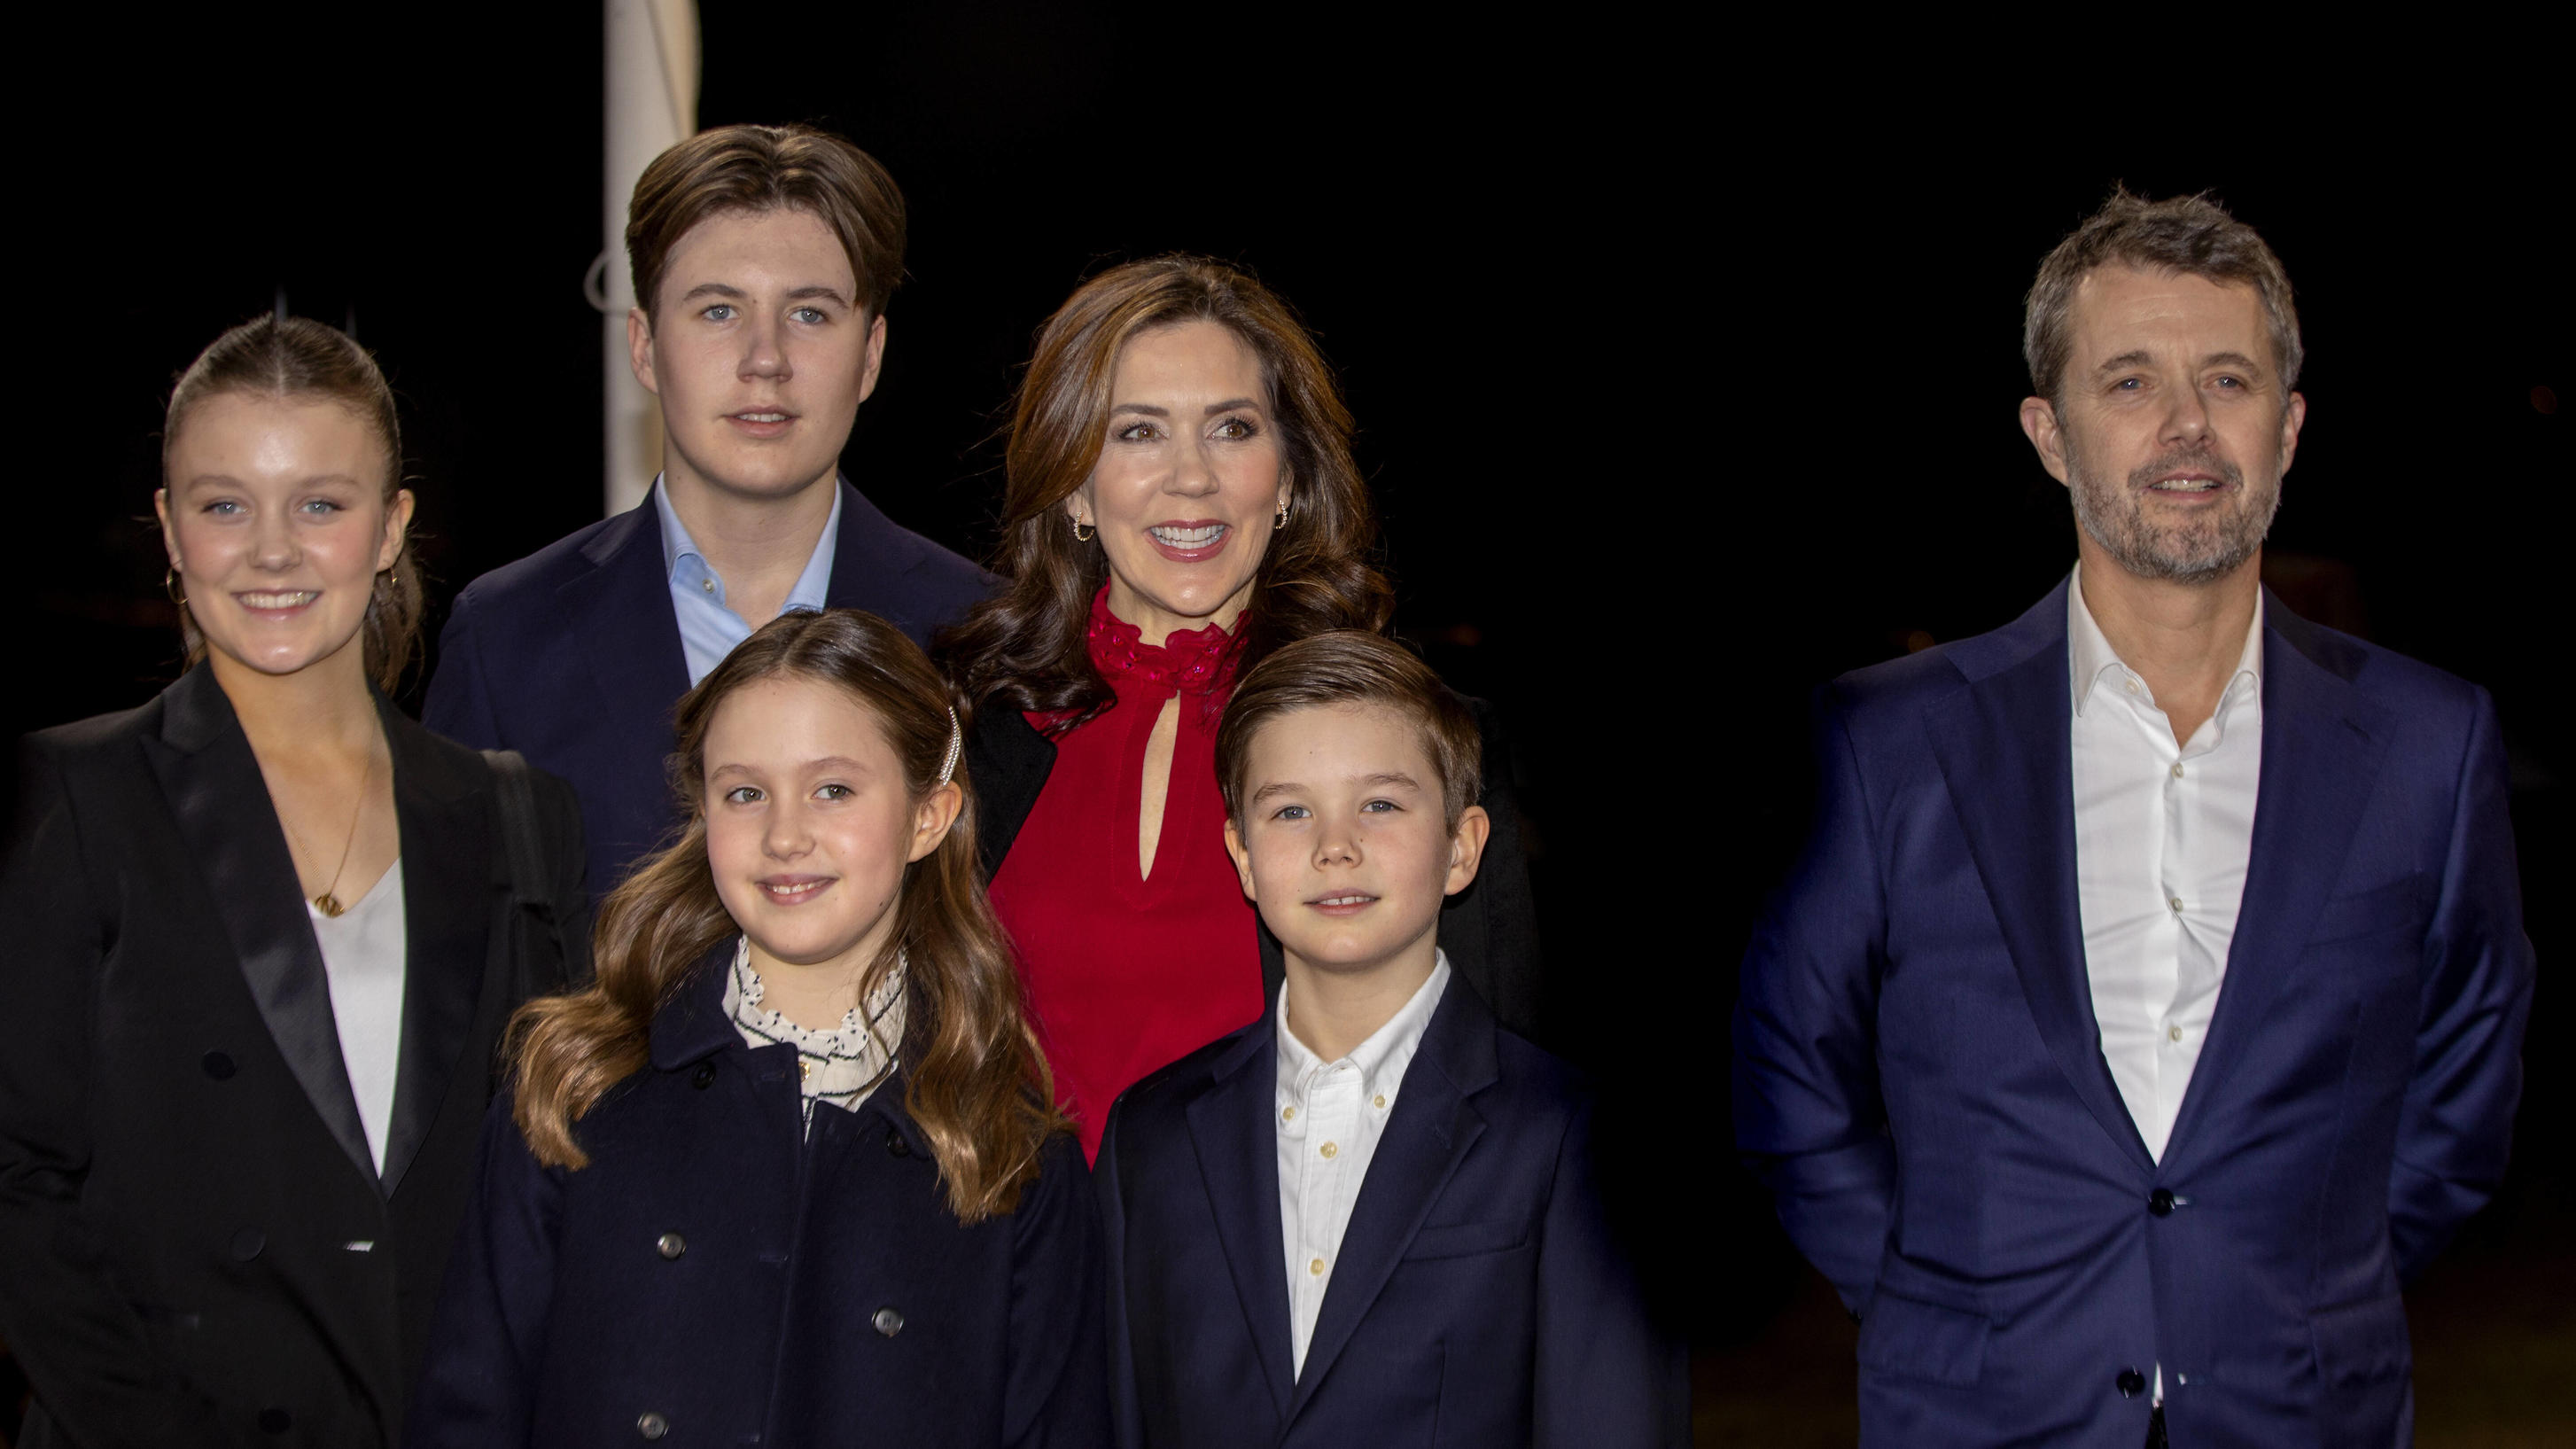  06-02-2022 Denmark Princess Mary and Prince Frederik and Prince Christian and Princess Isabella and Prince Vincent and Princess Josephine arriving for the TV2 birthday show, Mary 50 we celebrate Denmark crown princess, at the Vilhelm Lauritzen Termi